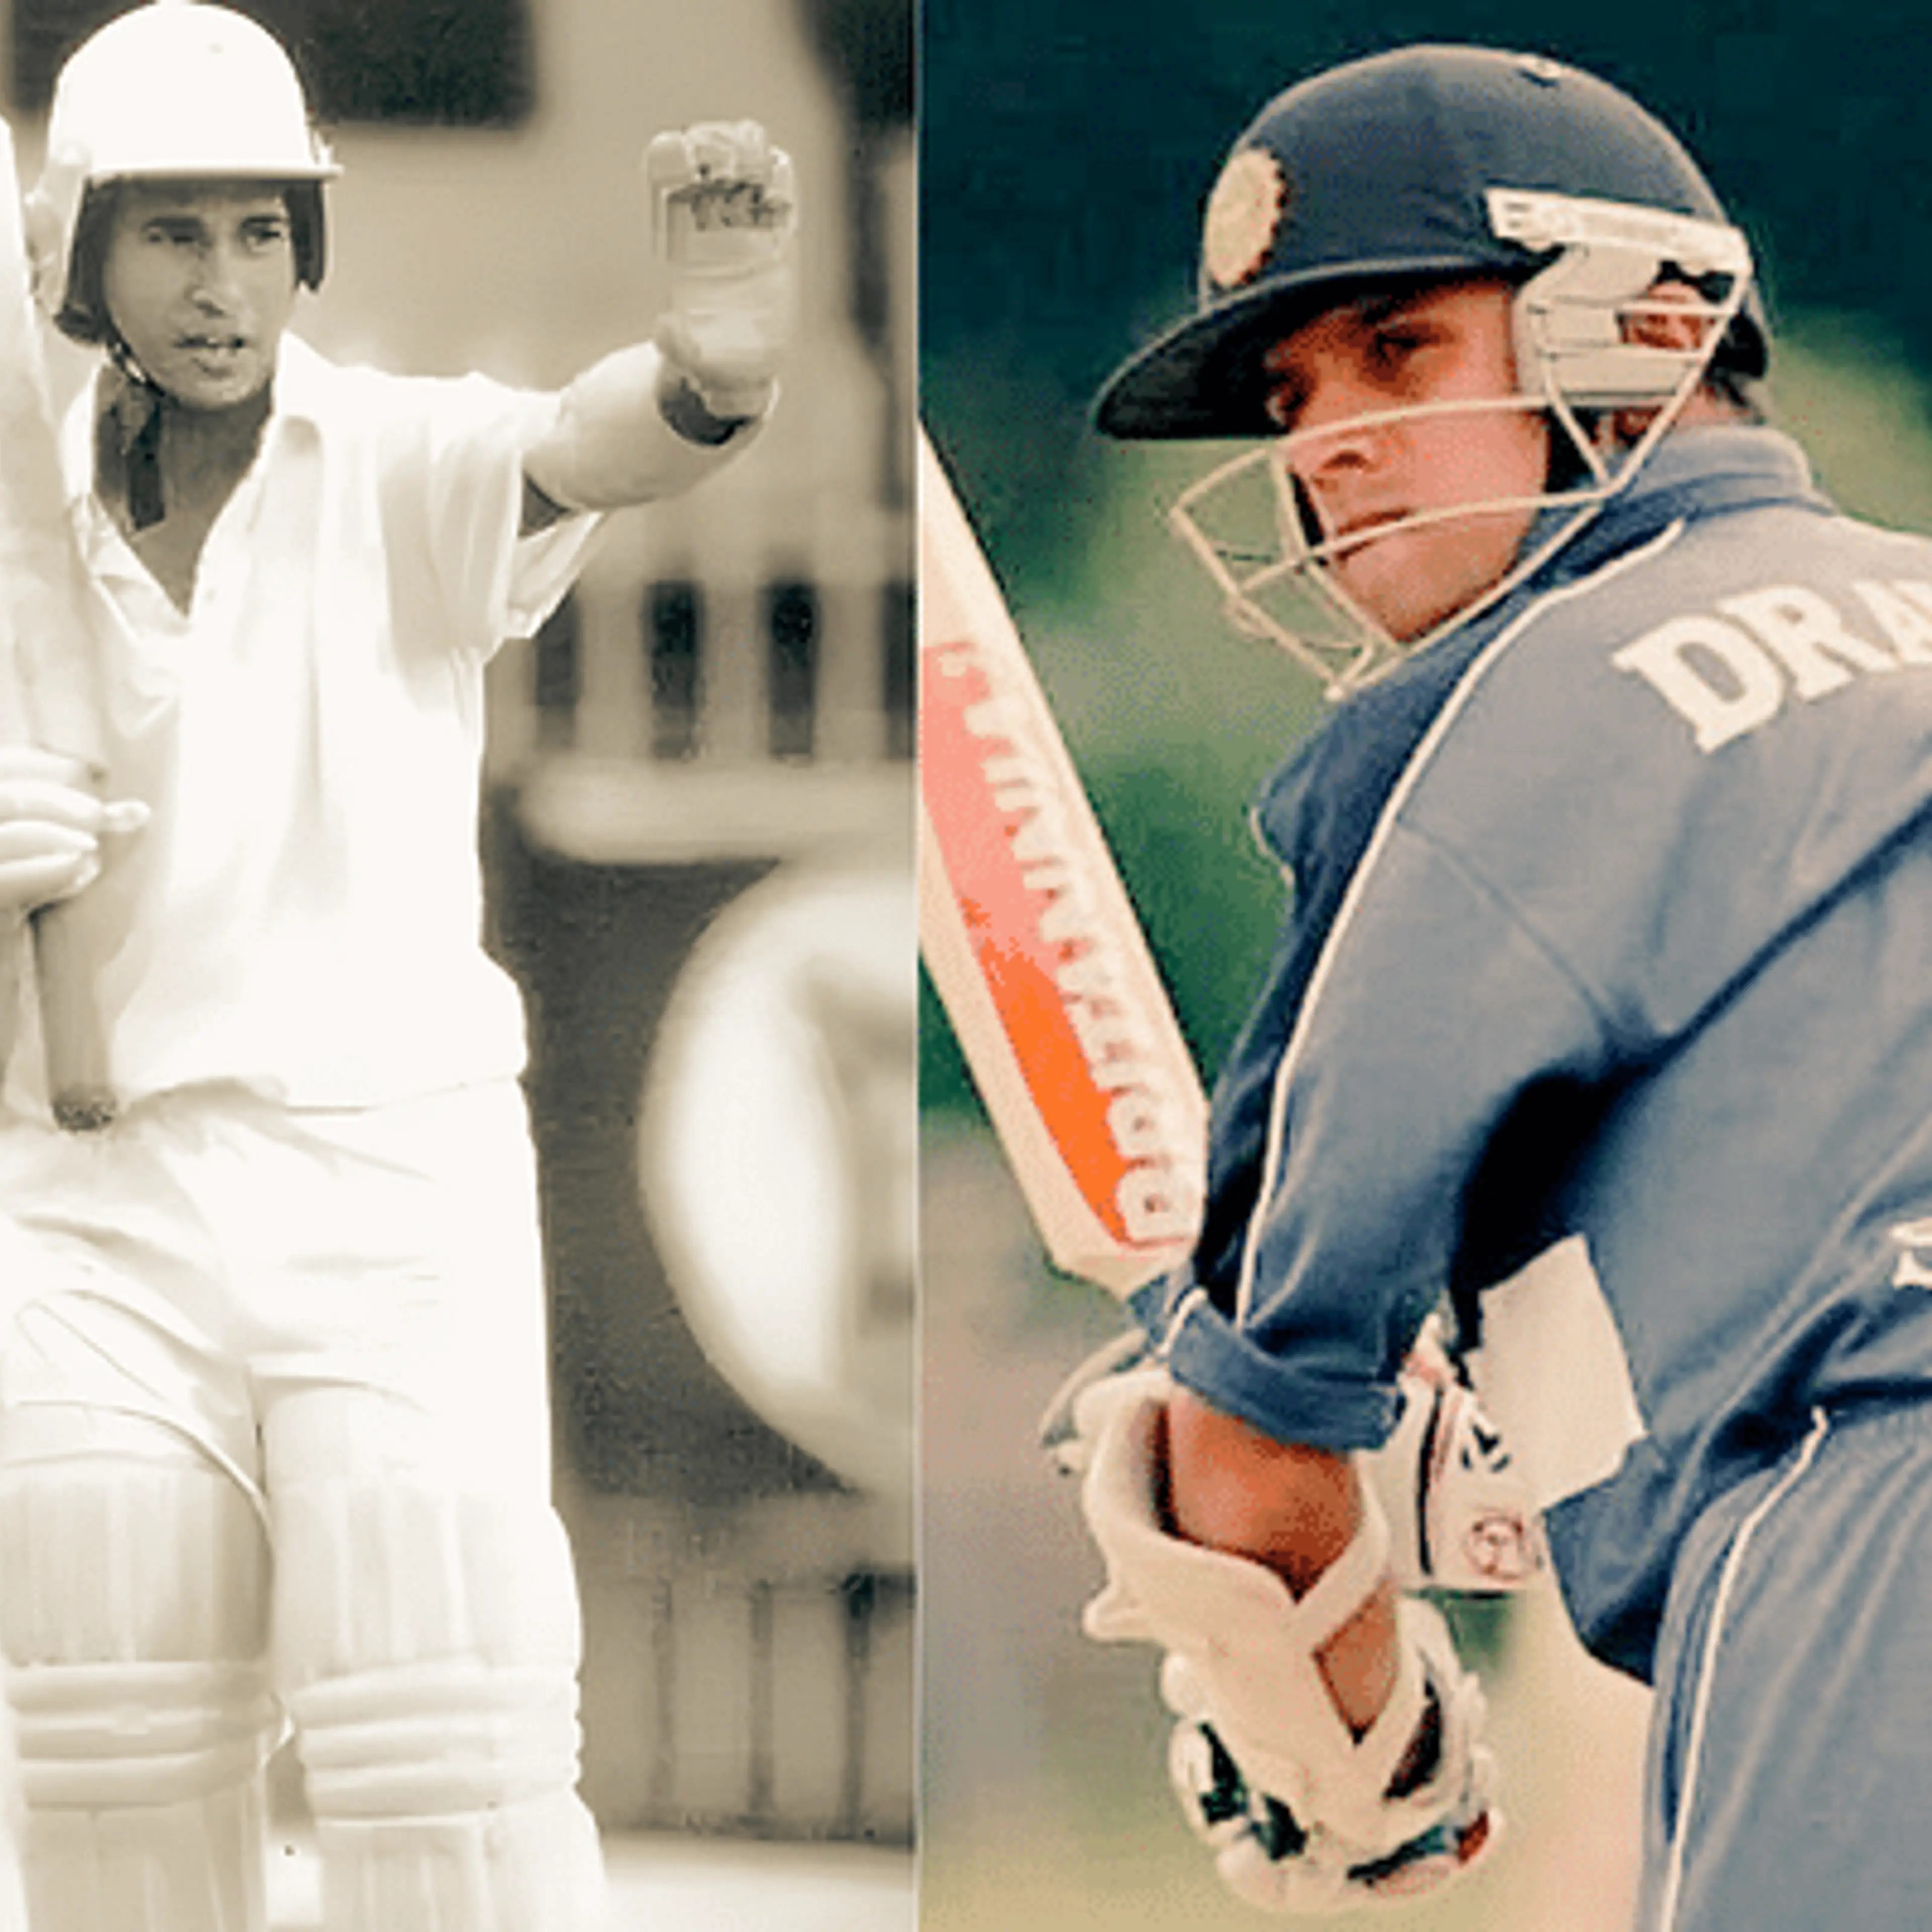 Sachin Once Played for Pakistan: Remarkable Cricket Tales Unveiled